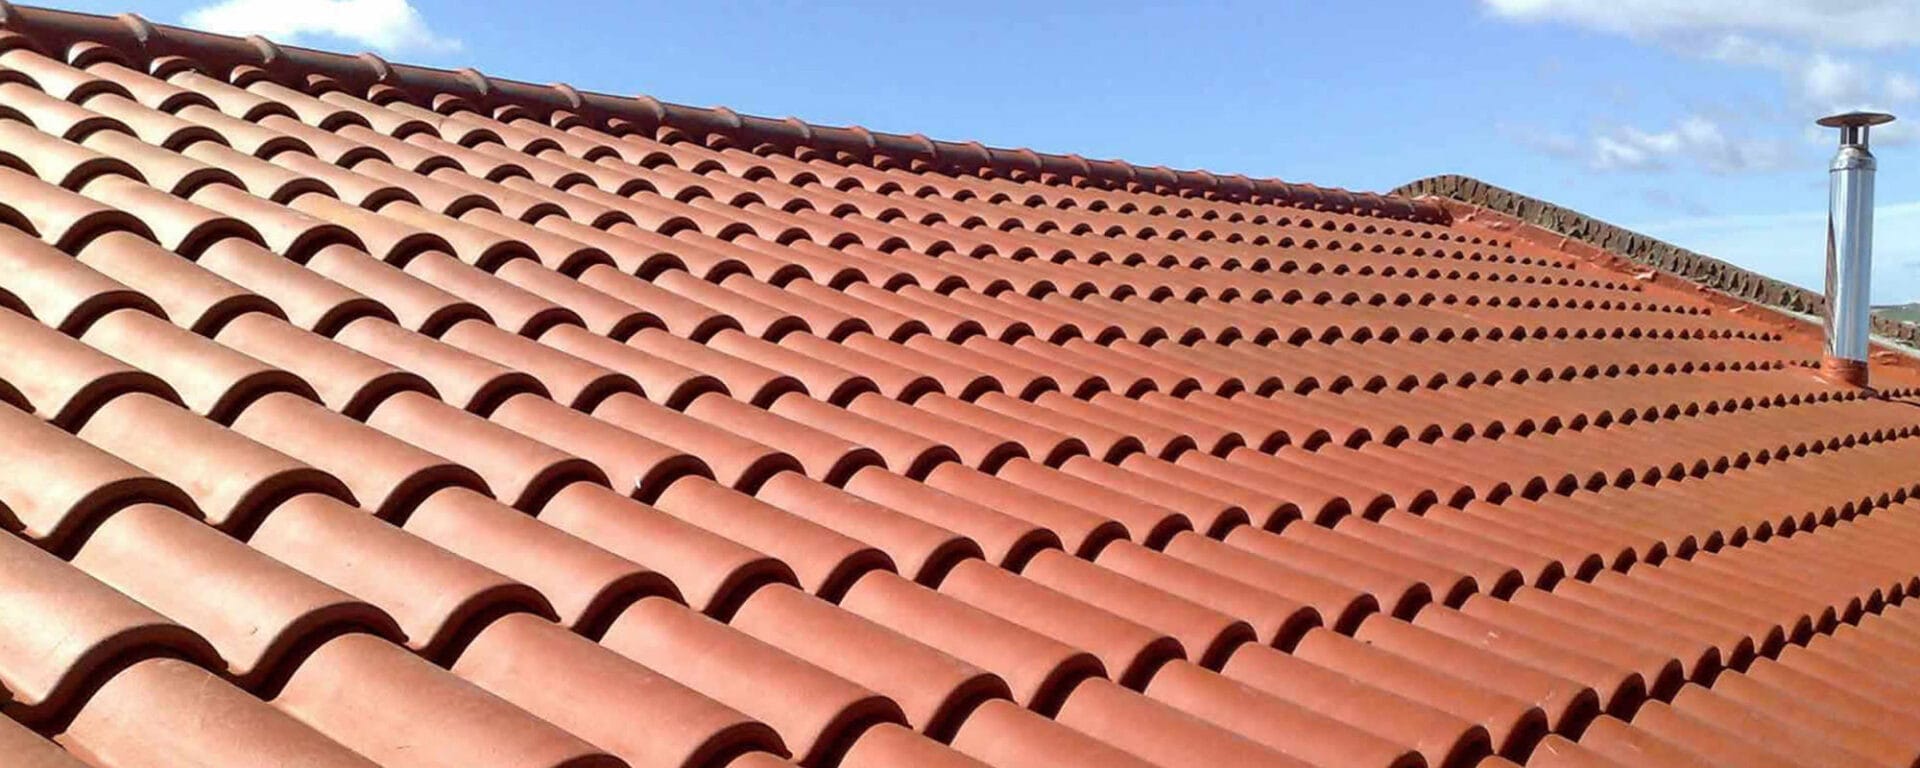 Central Florida Trusted Tile Roofing Company